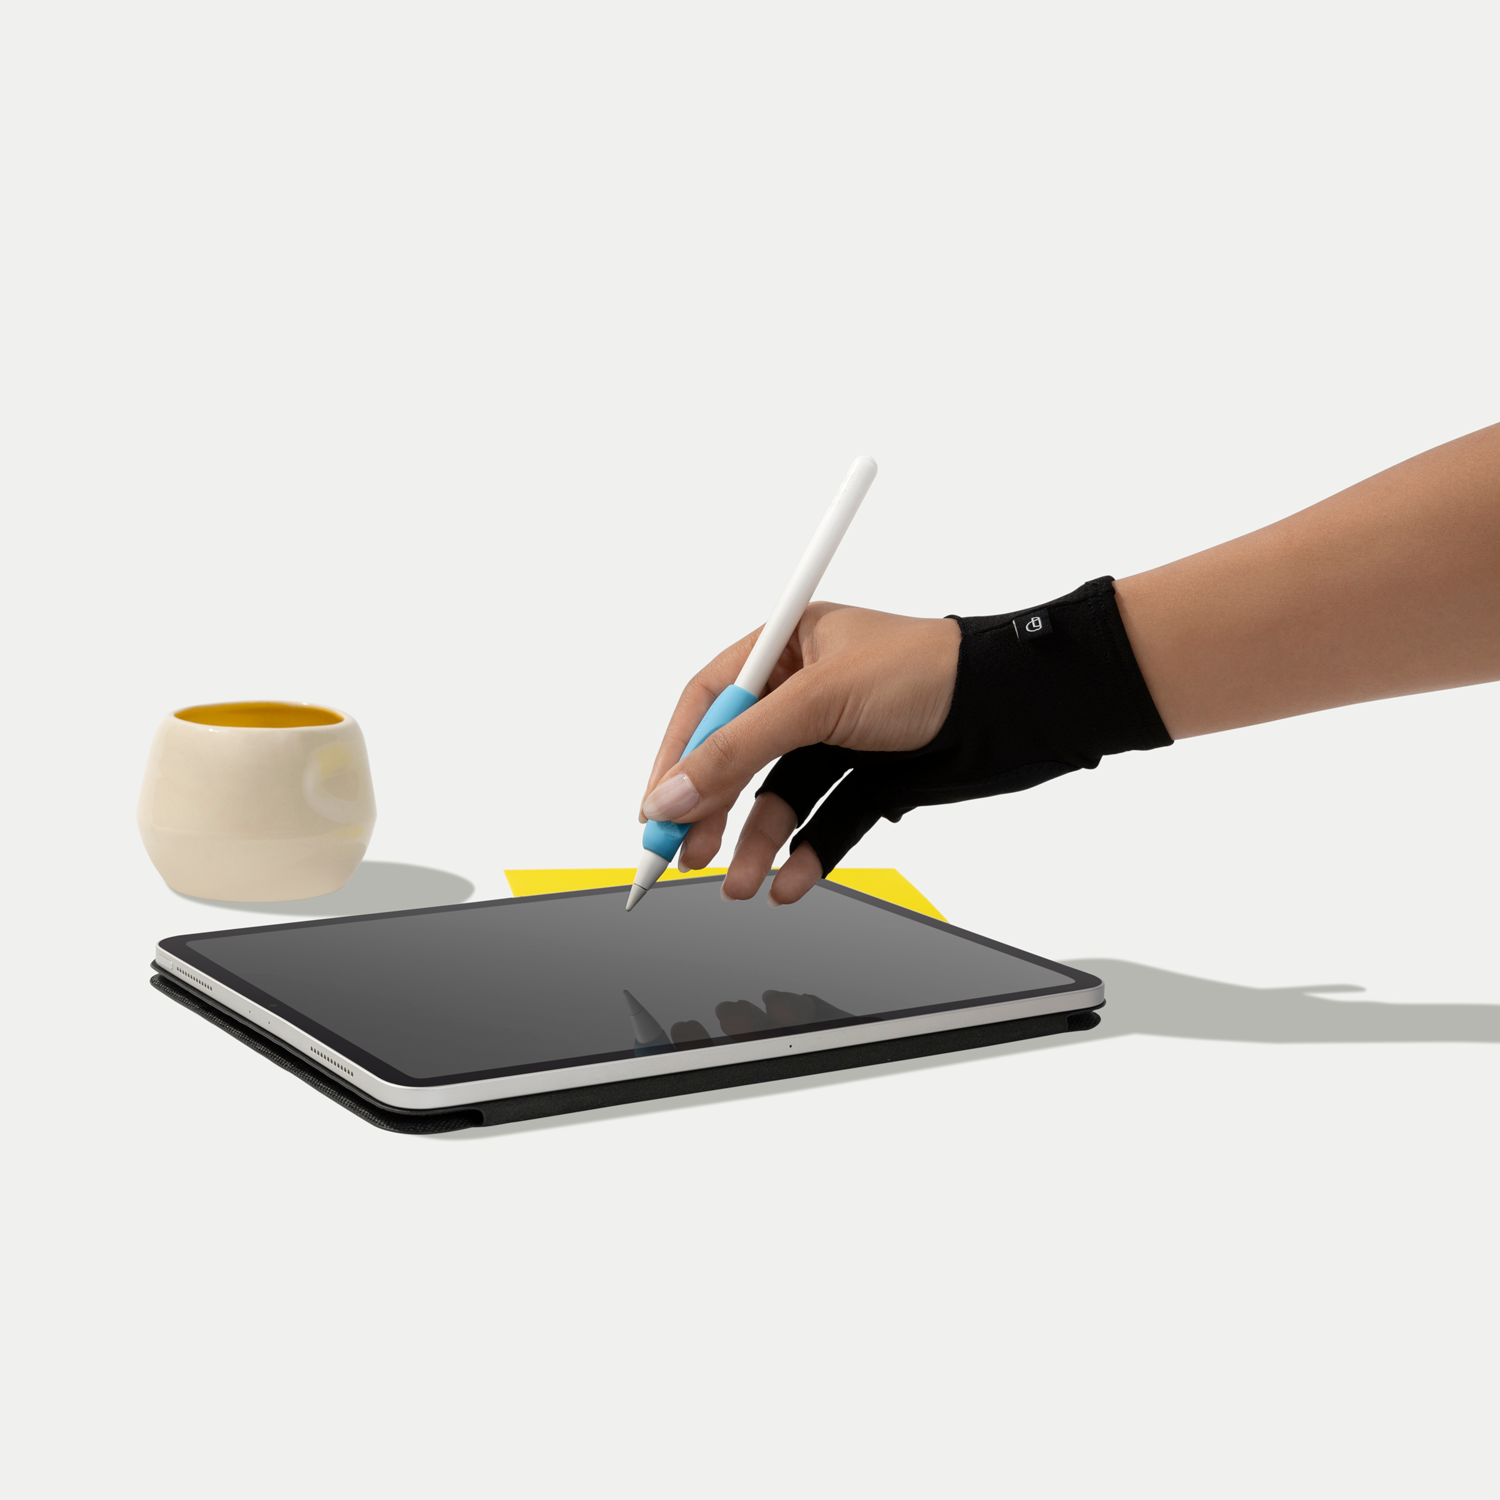 Paperlike's Drawing Glove is made with polyester microfiber that cleans the screen while you work